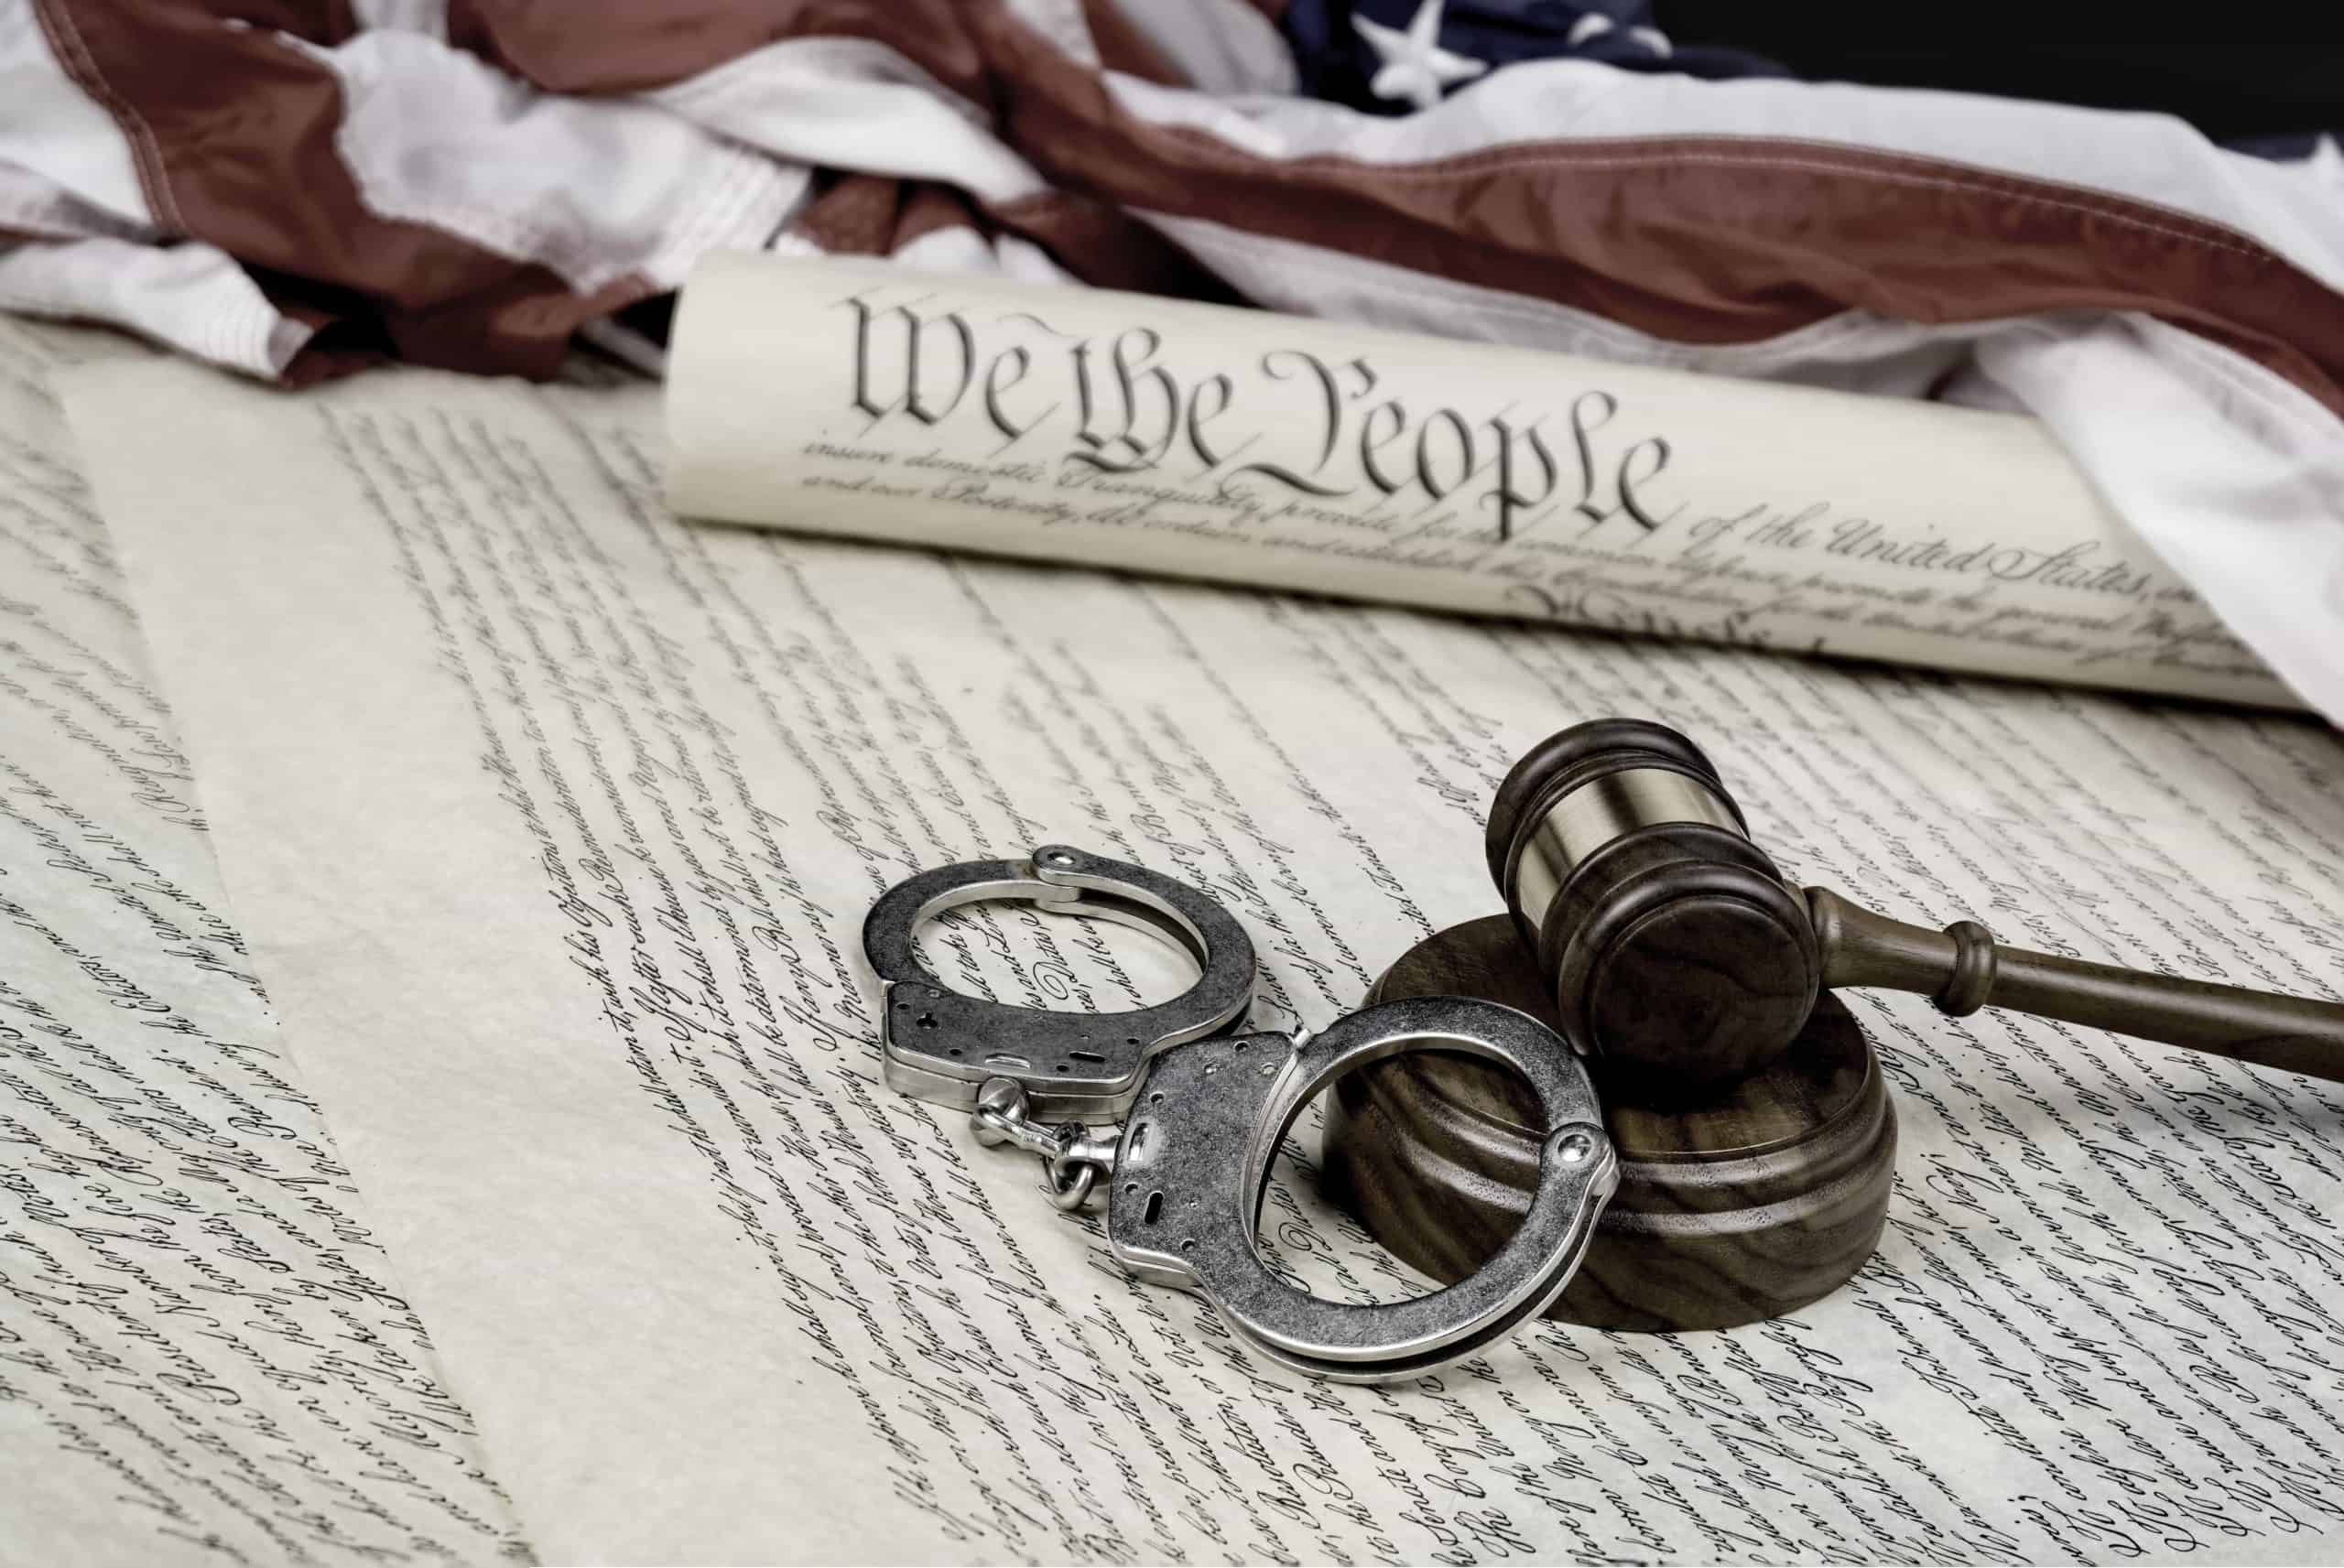 Constitution, Gavel and handcuffs